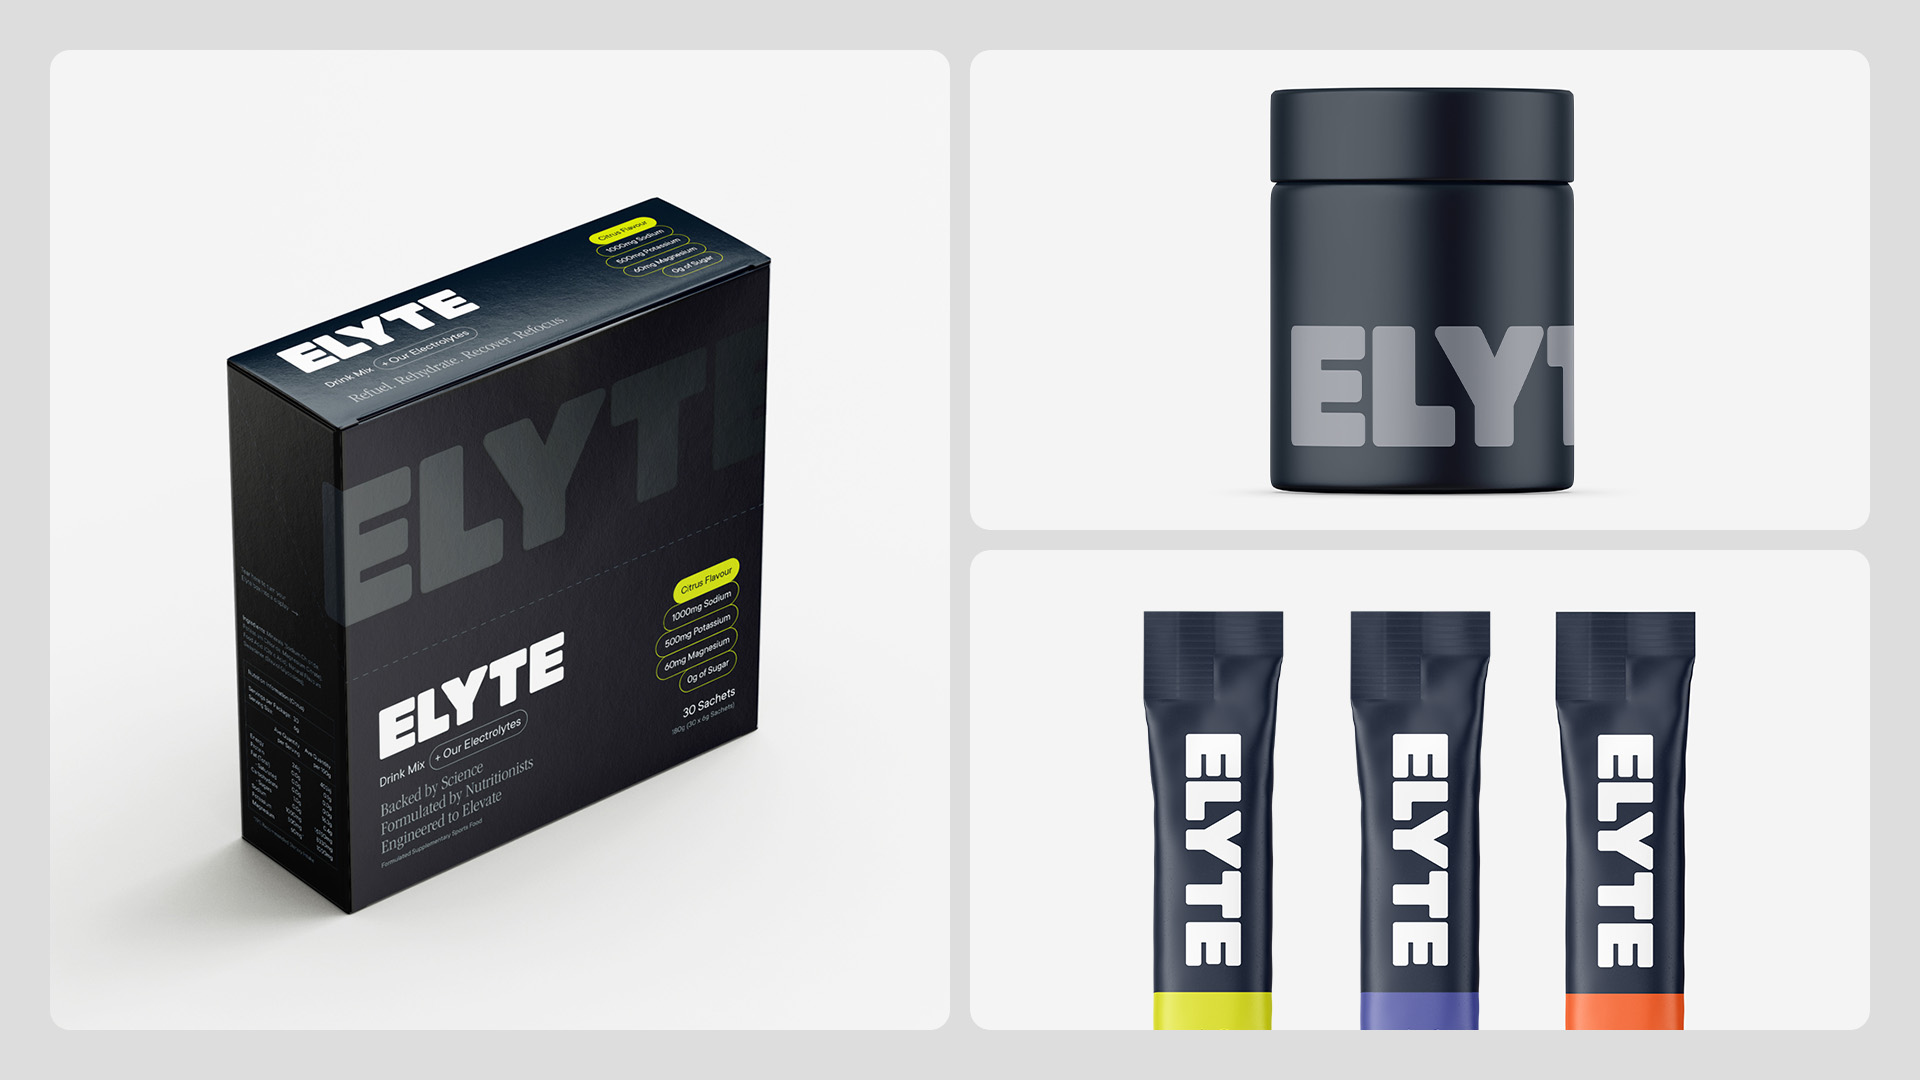 Elyte packaging examples. A box, tub and sachets.